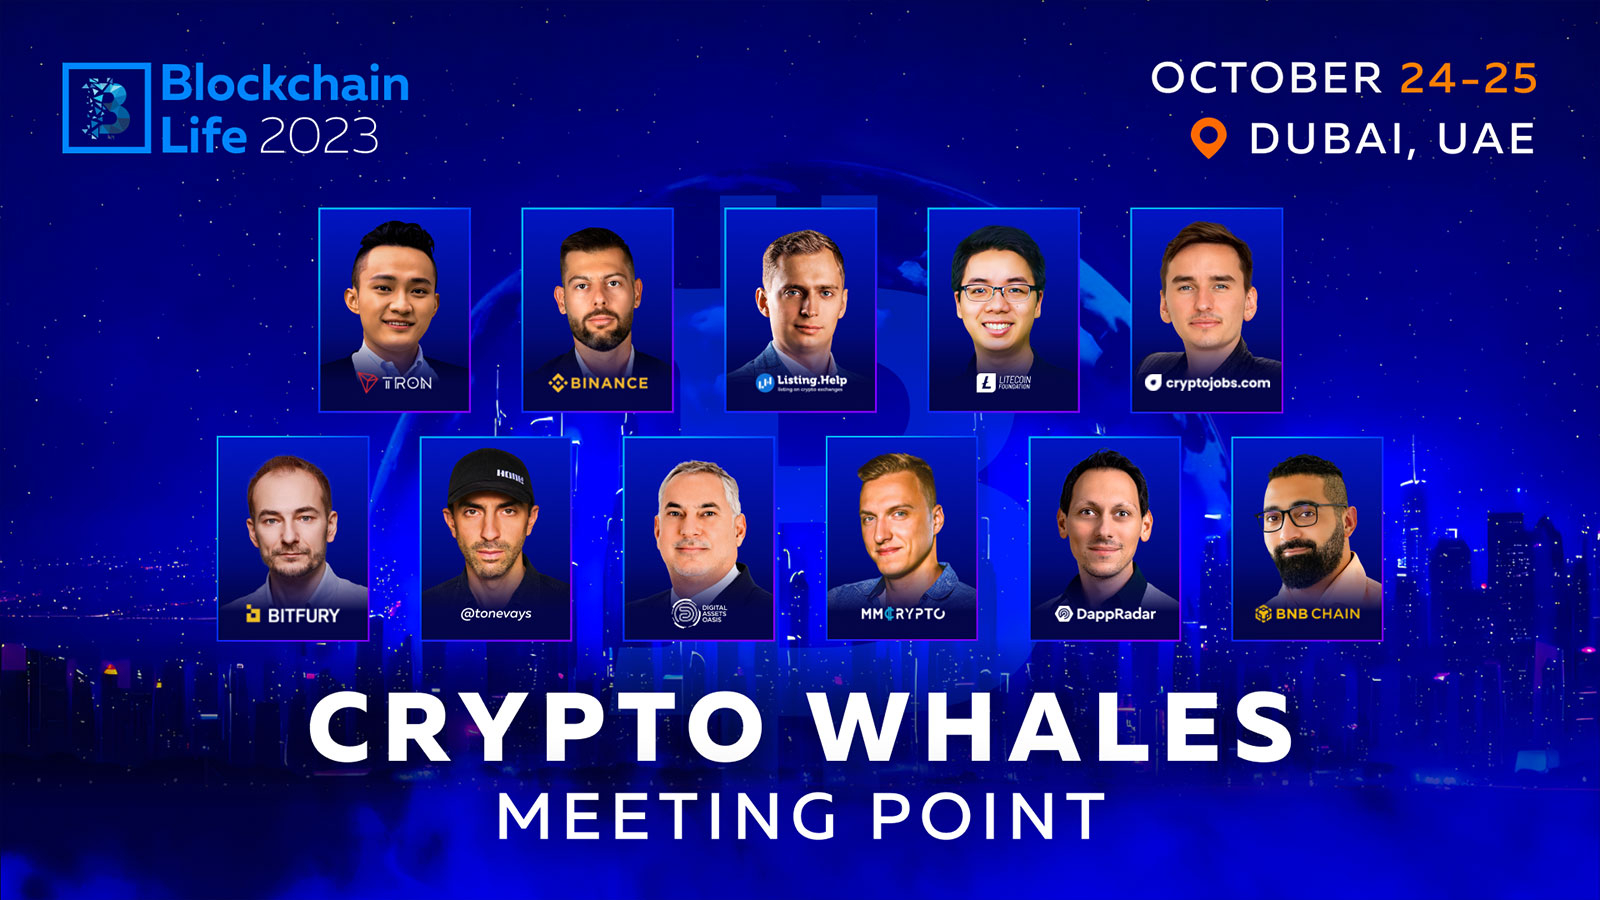 Crypto Whales are to meet at Blockchain Life 2023 in Dubai